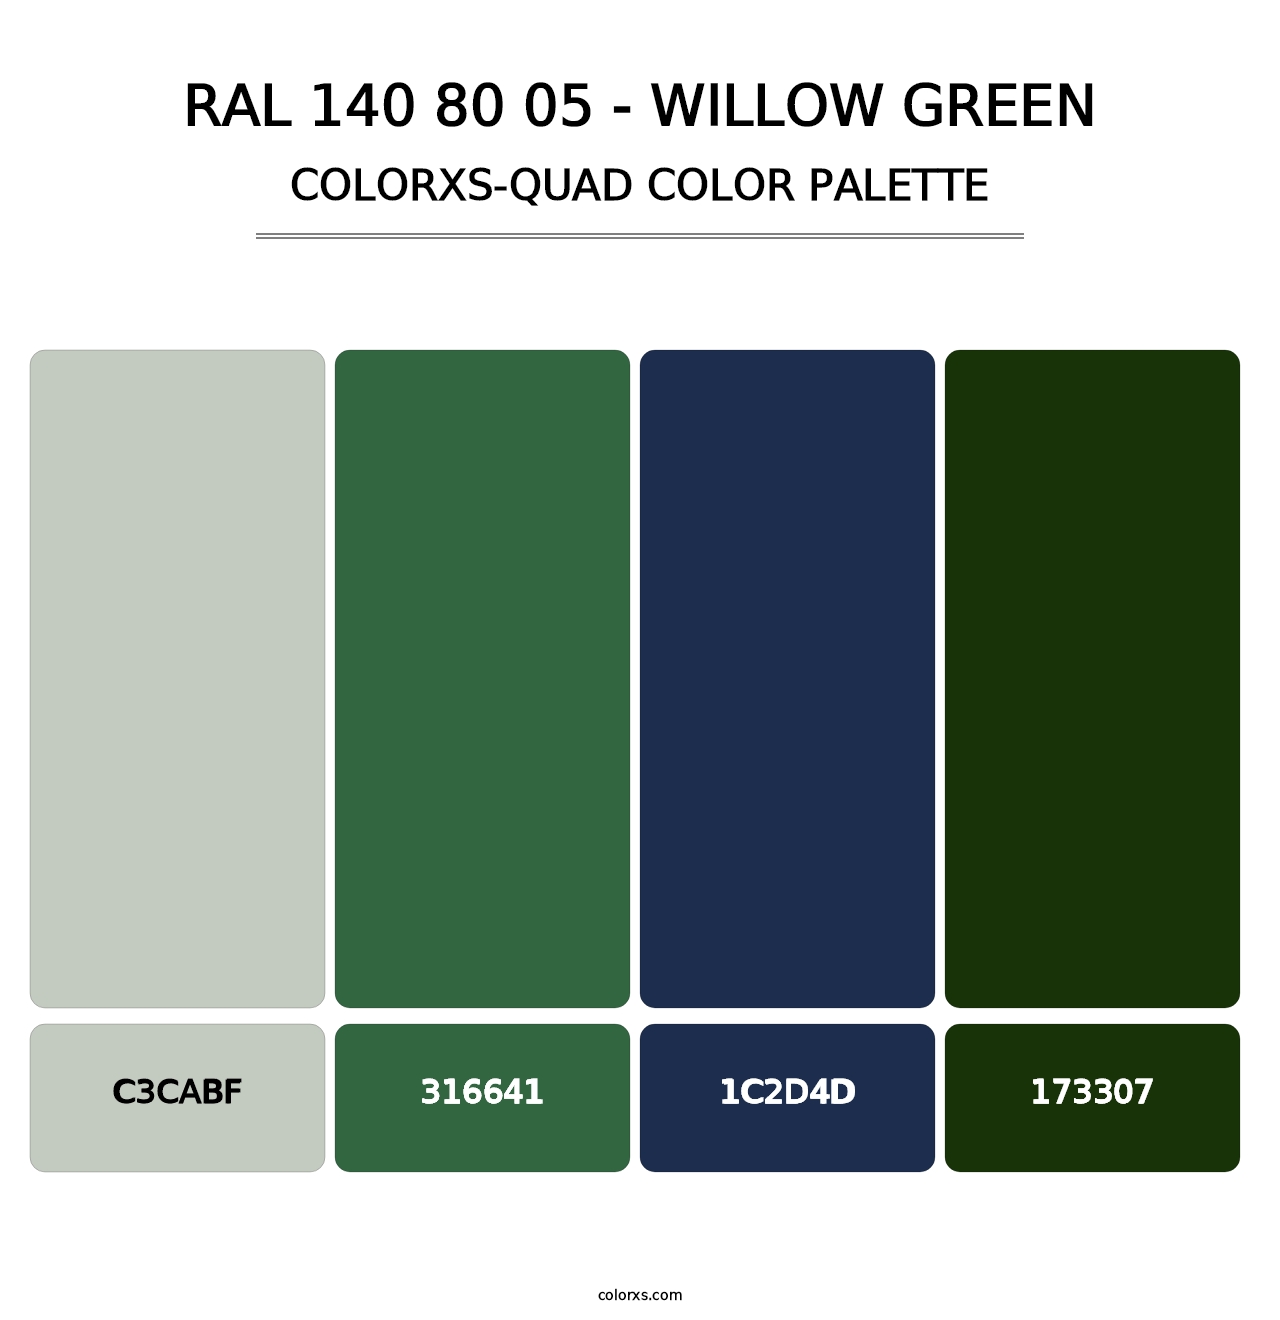 RAL 140 80 05 - Willow Green - Colorxs Quad Palette